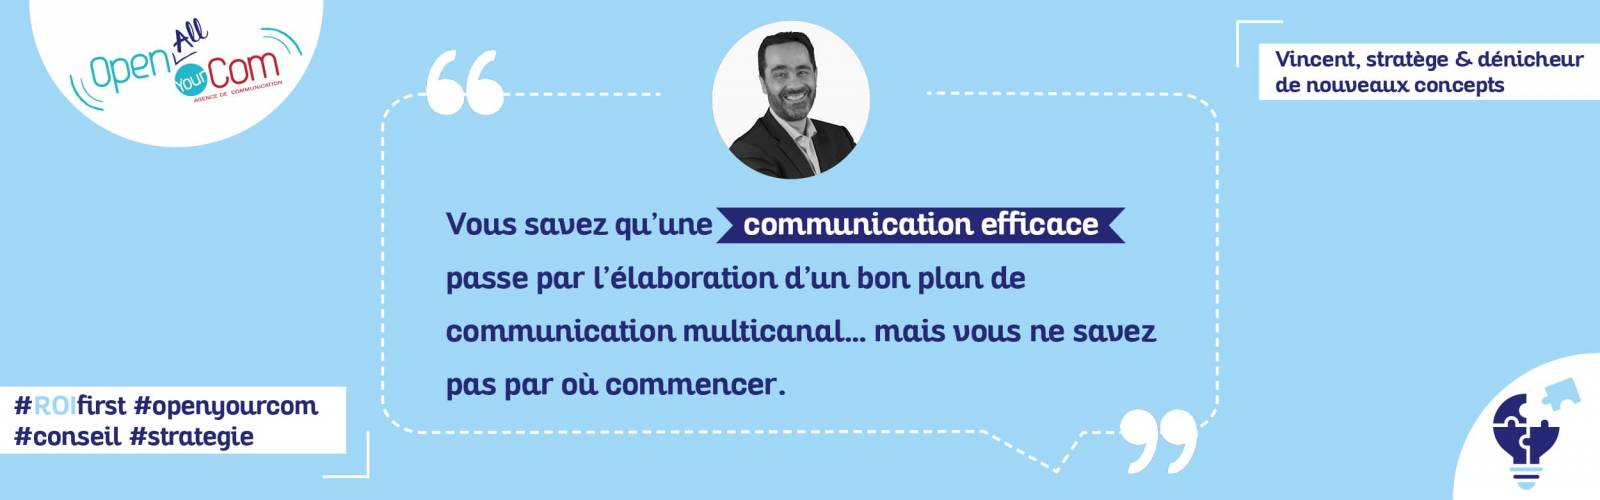 Open Your Com agence communication 360 communication globale strategie conseil